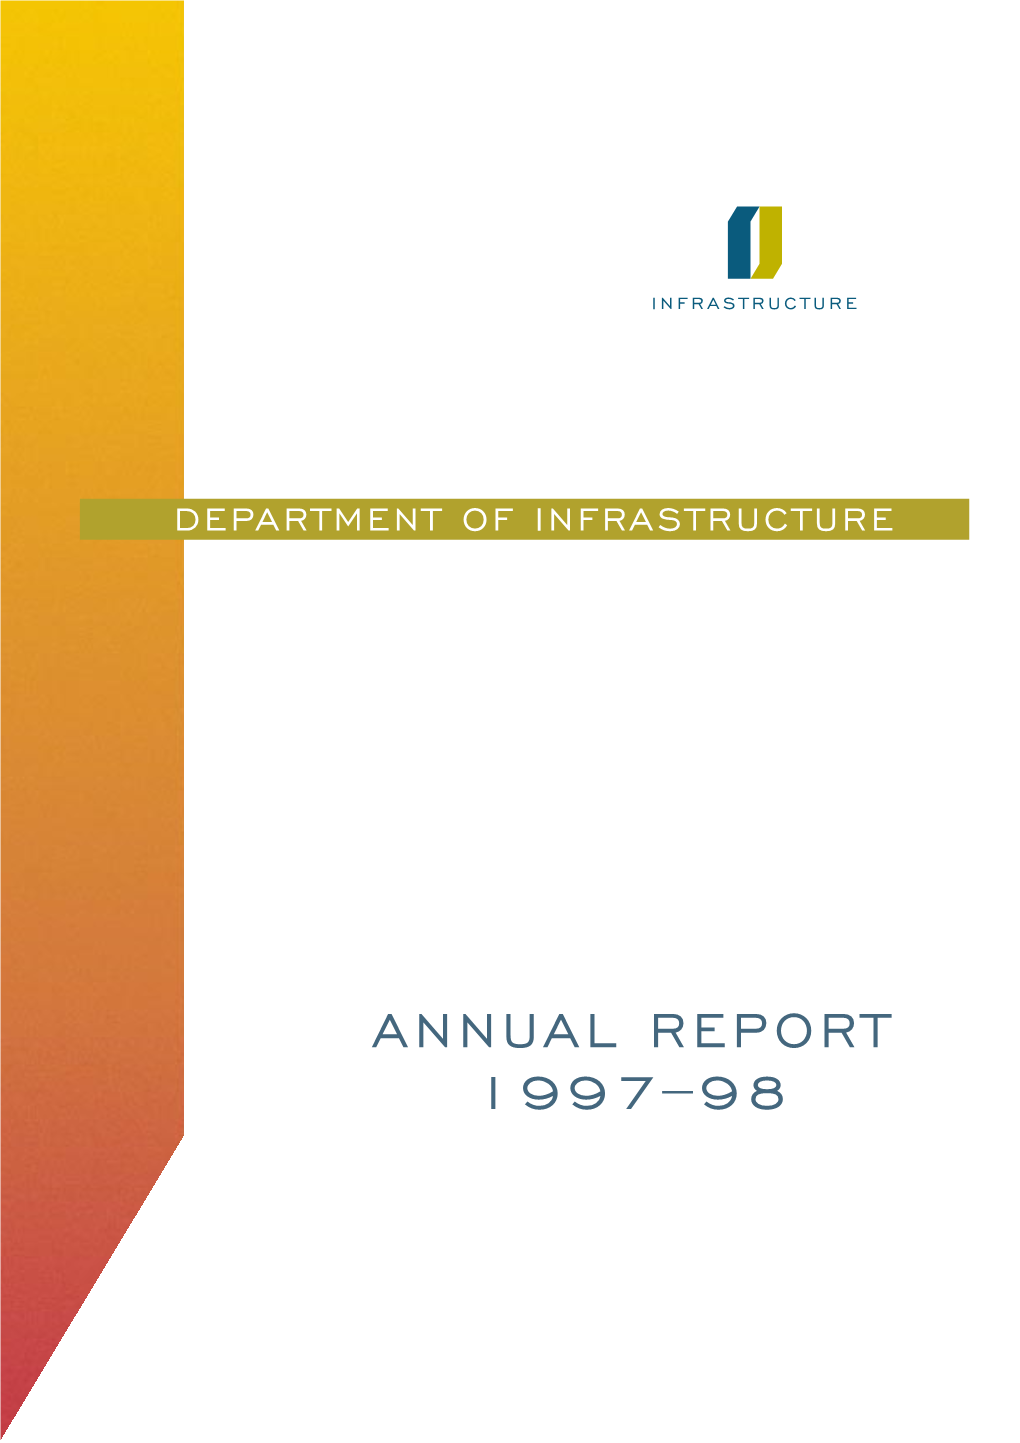 Department of Infrastructure Annual Report 1997-1998